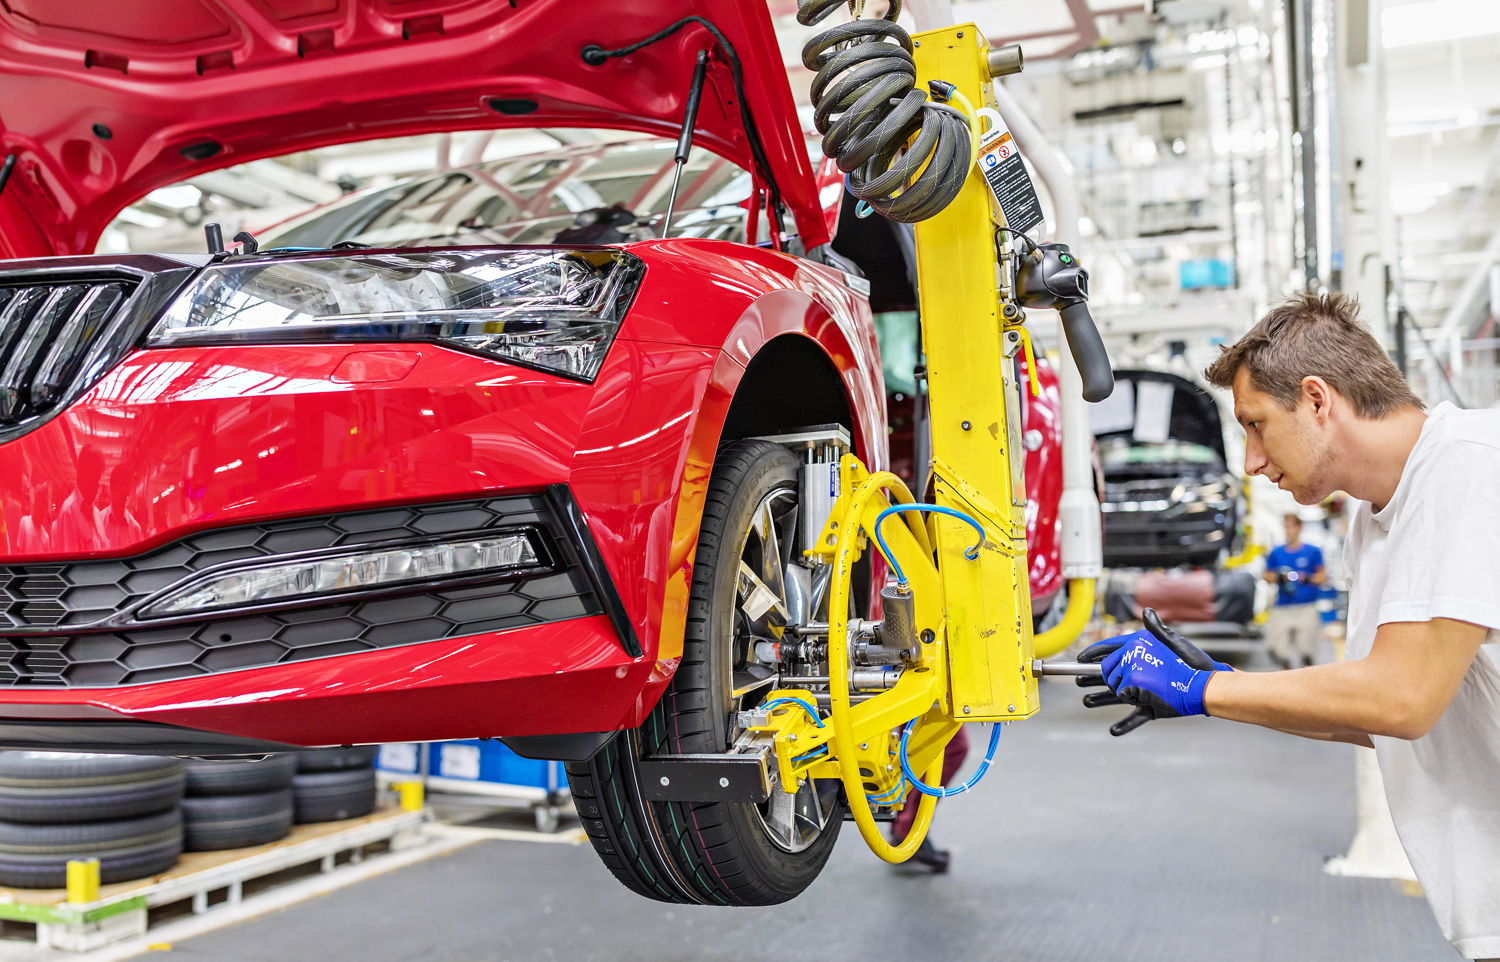 The ŠKODA SUPERB will be manufactured at the
VOLKSWAGEN plant in Bratislava from 2023. ŠKODA
AUTO will use the extra capacity in Kvasiny for building the
brand’s successful SUVs. The increase in production
capacity will present customers with shorter lead times.
